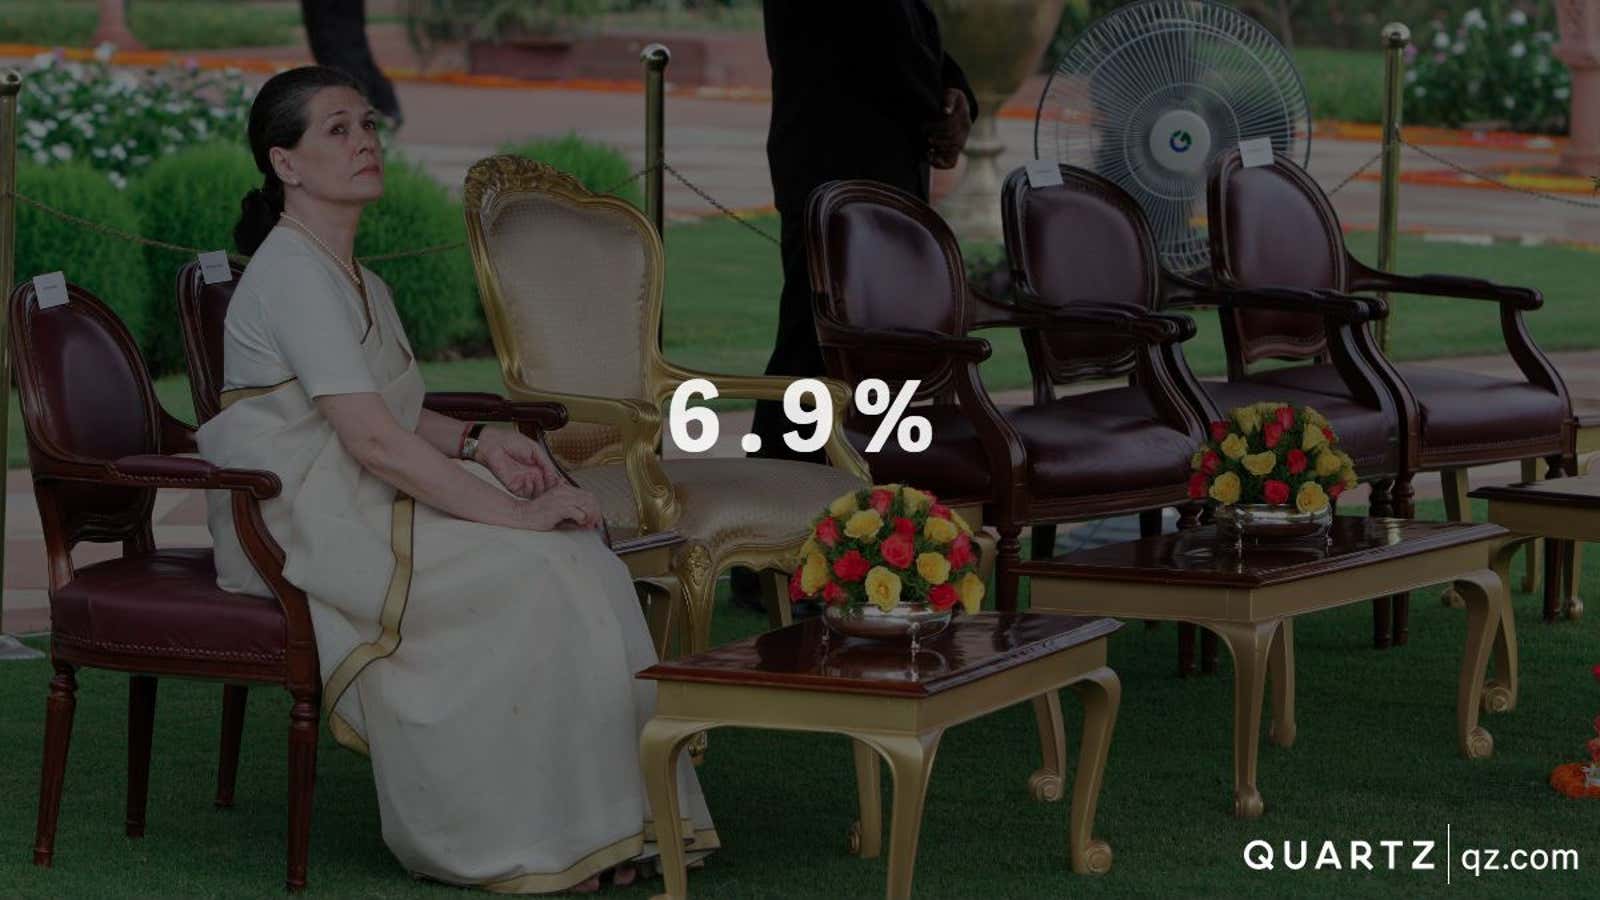 The percentage of women running in Indian elections is even smaller than the percentage of female MPs